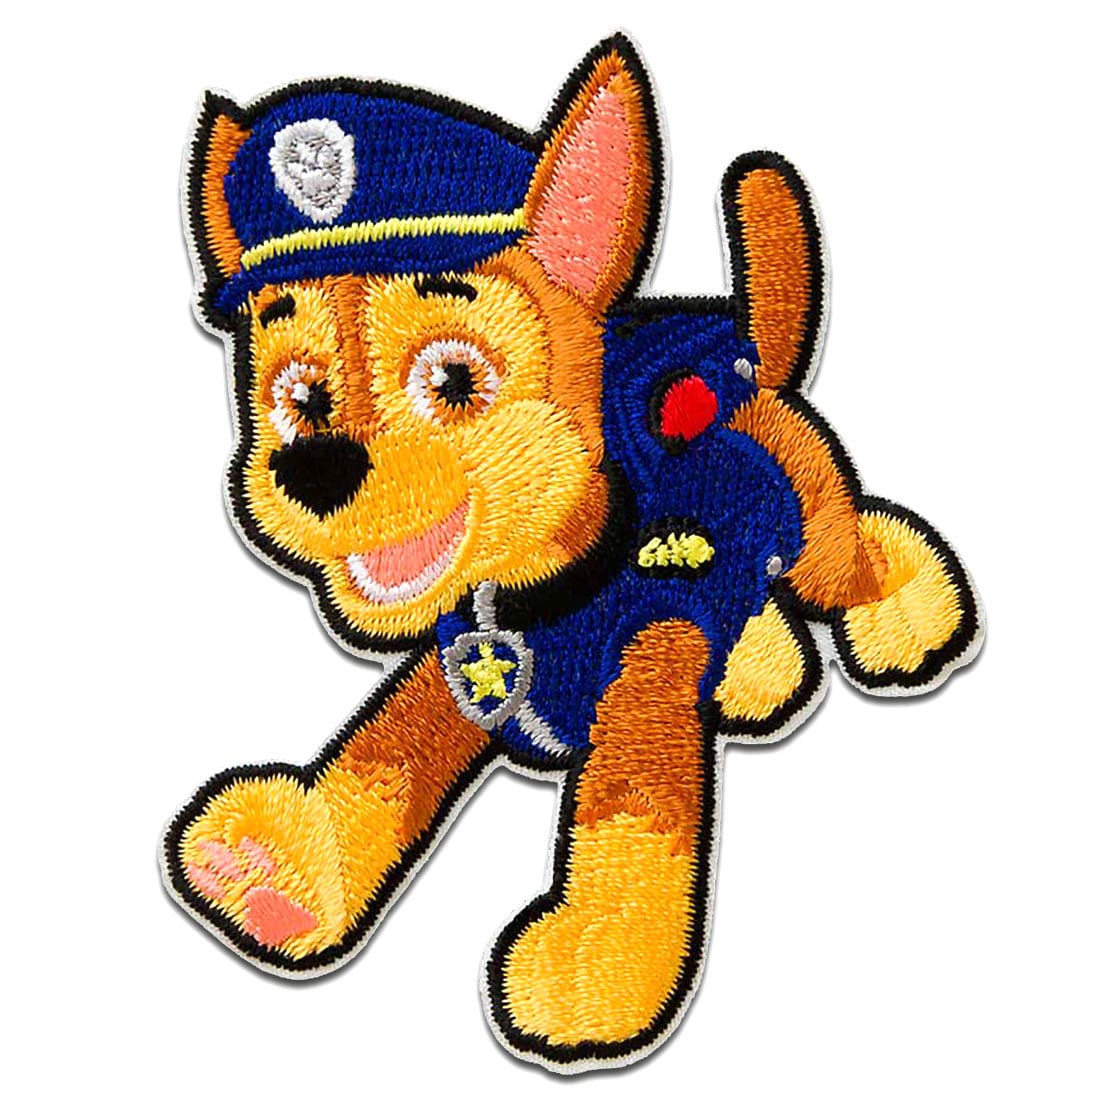 6 Inch Rubble Paw Patrol Pup Wall Decal Sticker Badge Pups Puppy Puppies  Dog Dog